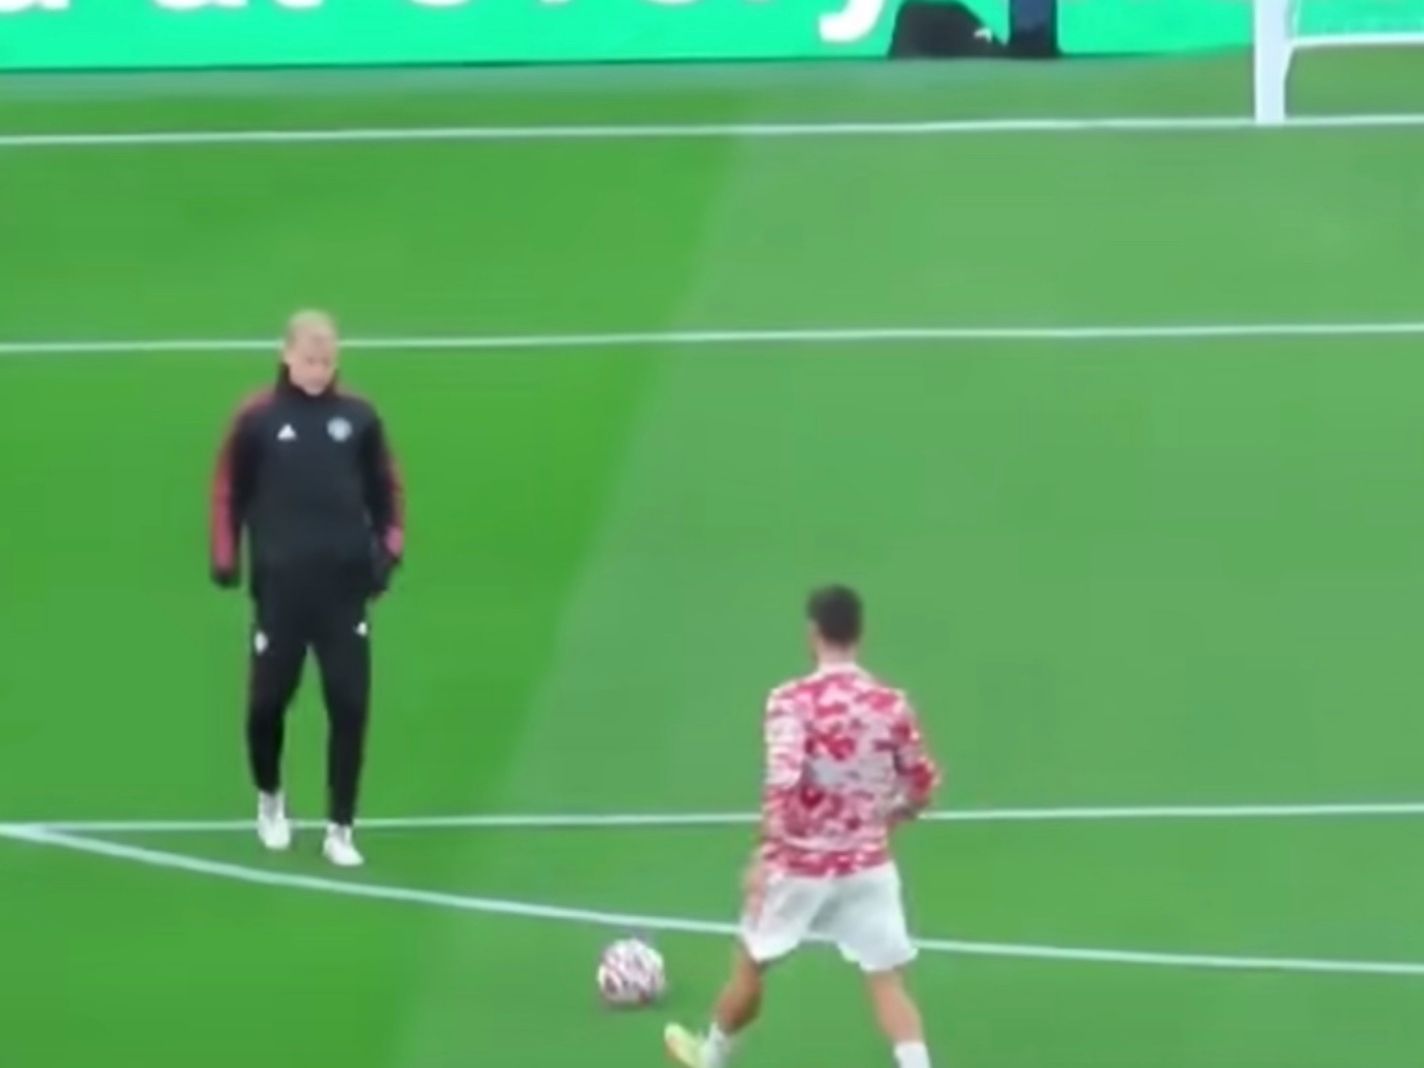 24-year-old Donny van de Beek reduced to ‘coaching’ role in disheartening footage